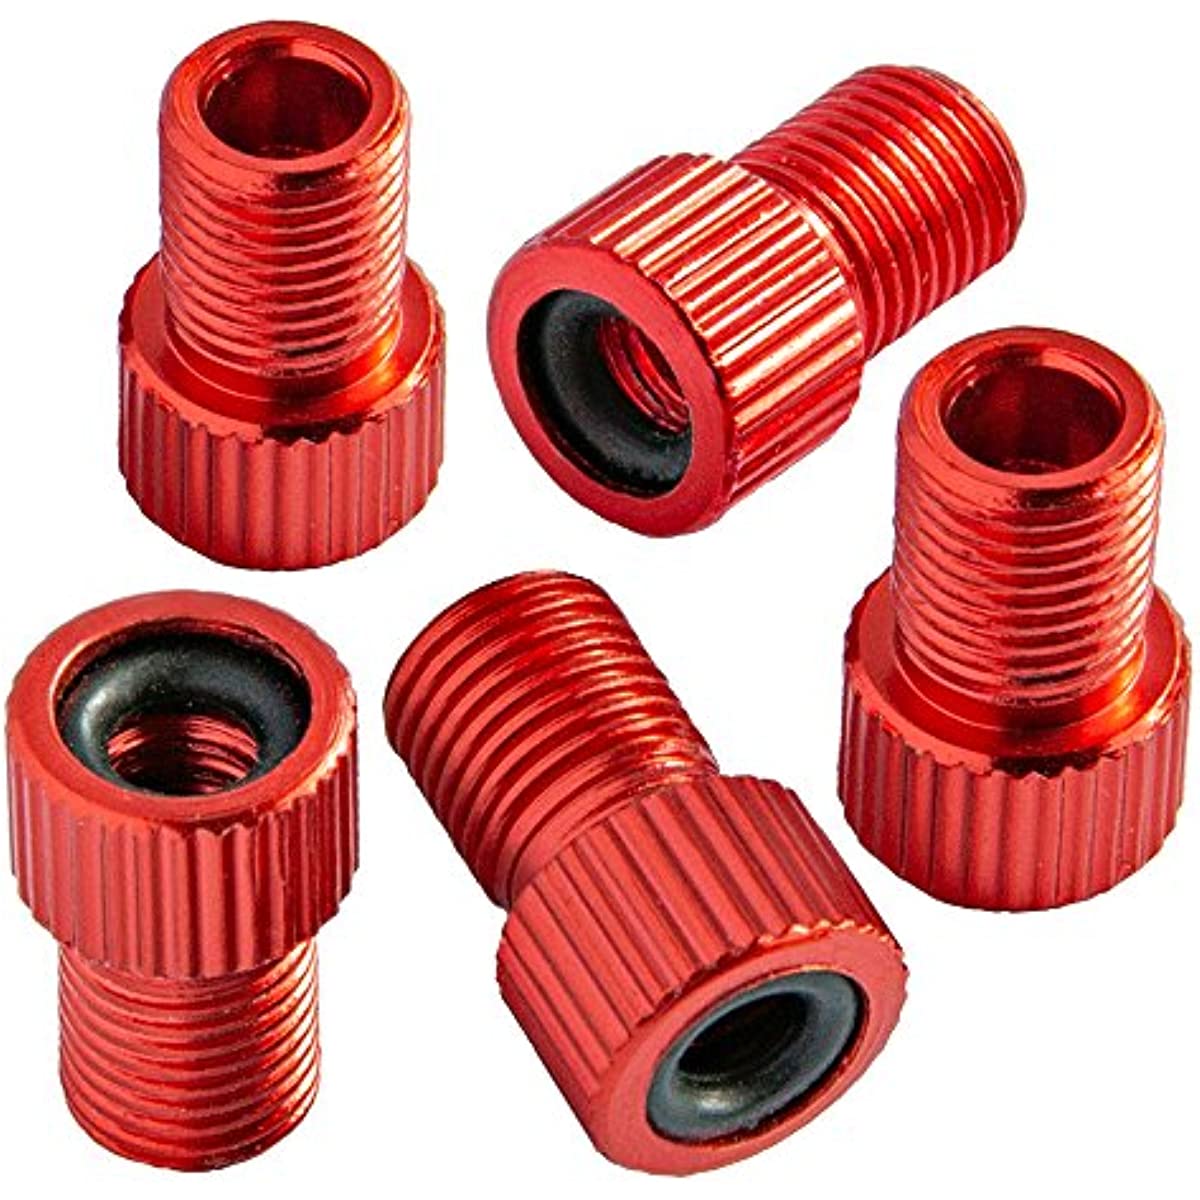 Presta Valve Adapter Aluminum Alloy Colorful Bike Inflate Adapter-Convert  Presta to Schrader, French/UK to US, Bike Inflatable Connector (5 Pack)